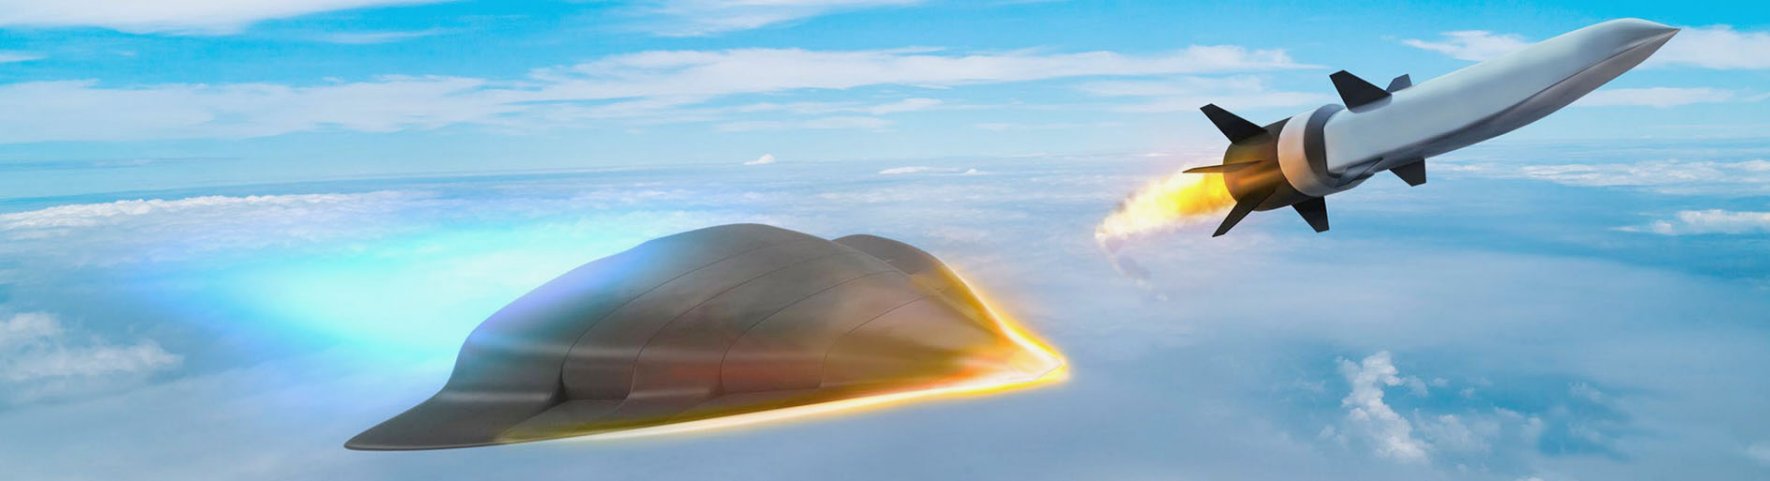 Artist’s rendering of prospective Raytheon hypersonic weapons solutions including boost-glide (left) and scramjet powered air-breathing (right foreground) hypersonic weapons concepts. (Raytheon)